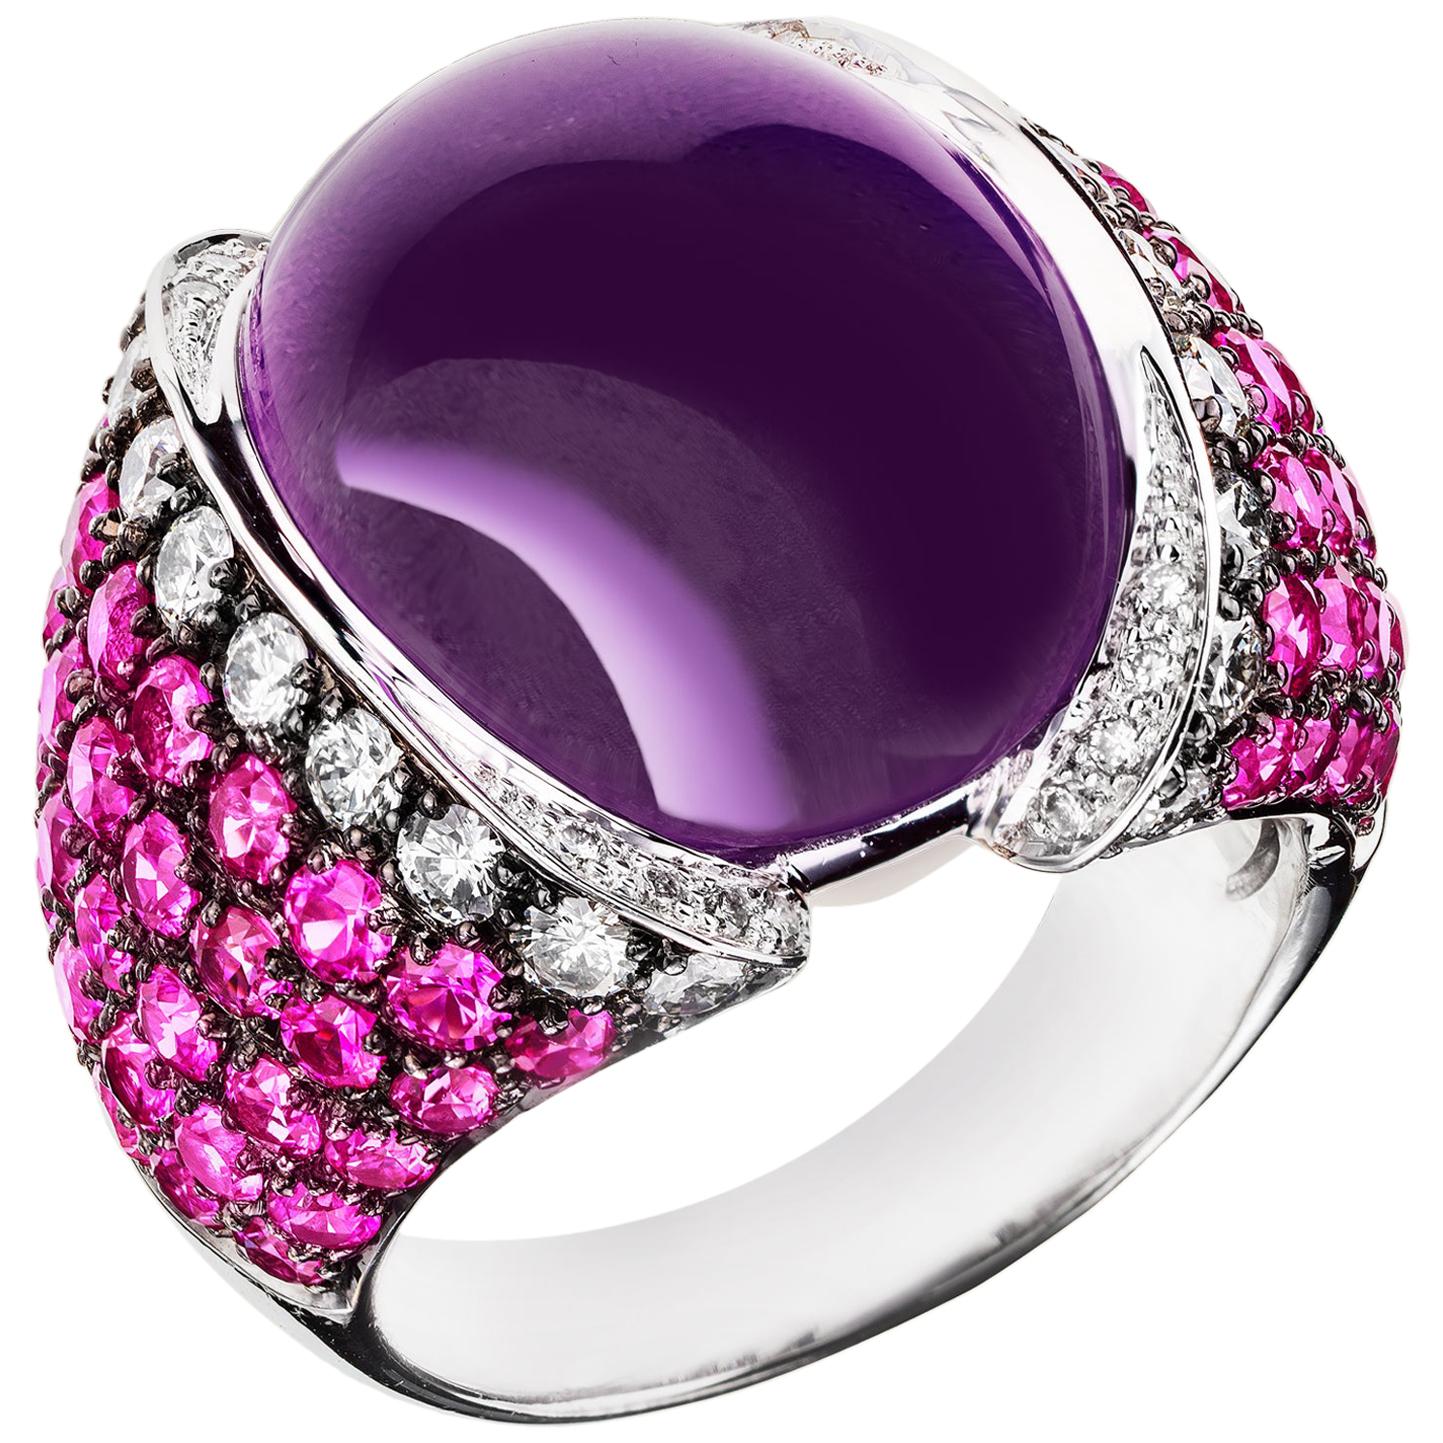 Sabbadini Jewelry Pink and Purple Amethyst Cocktail Ring For Sale